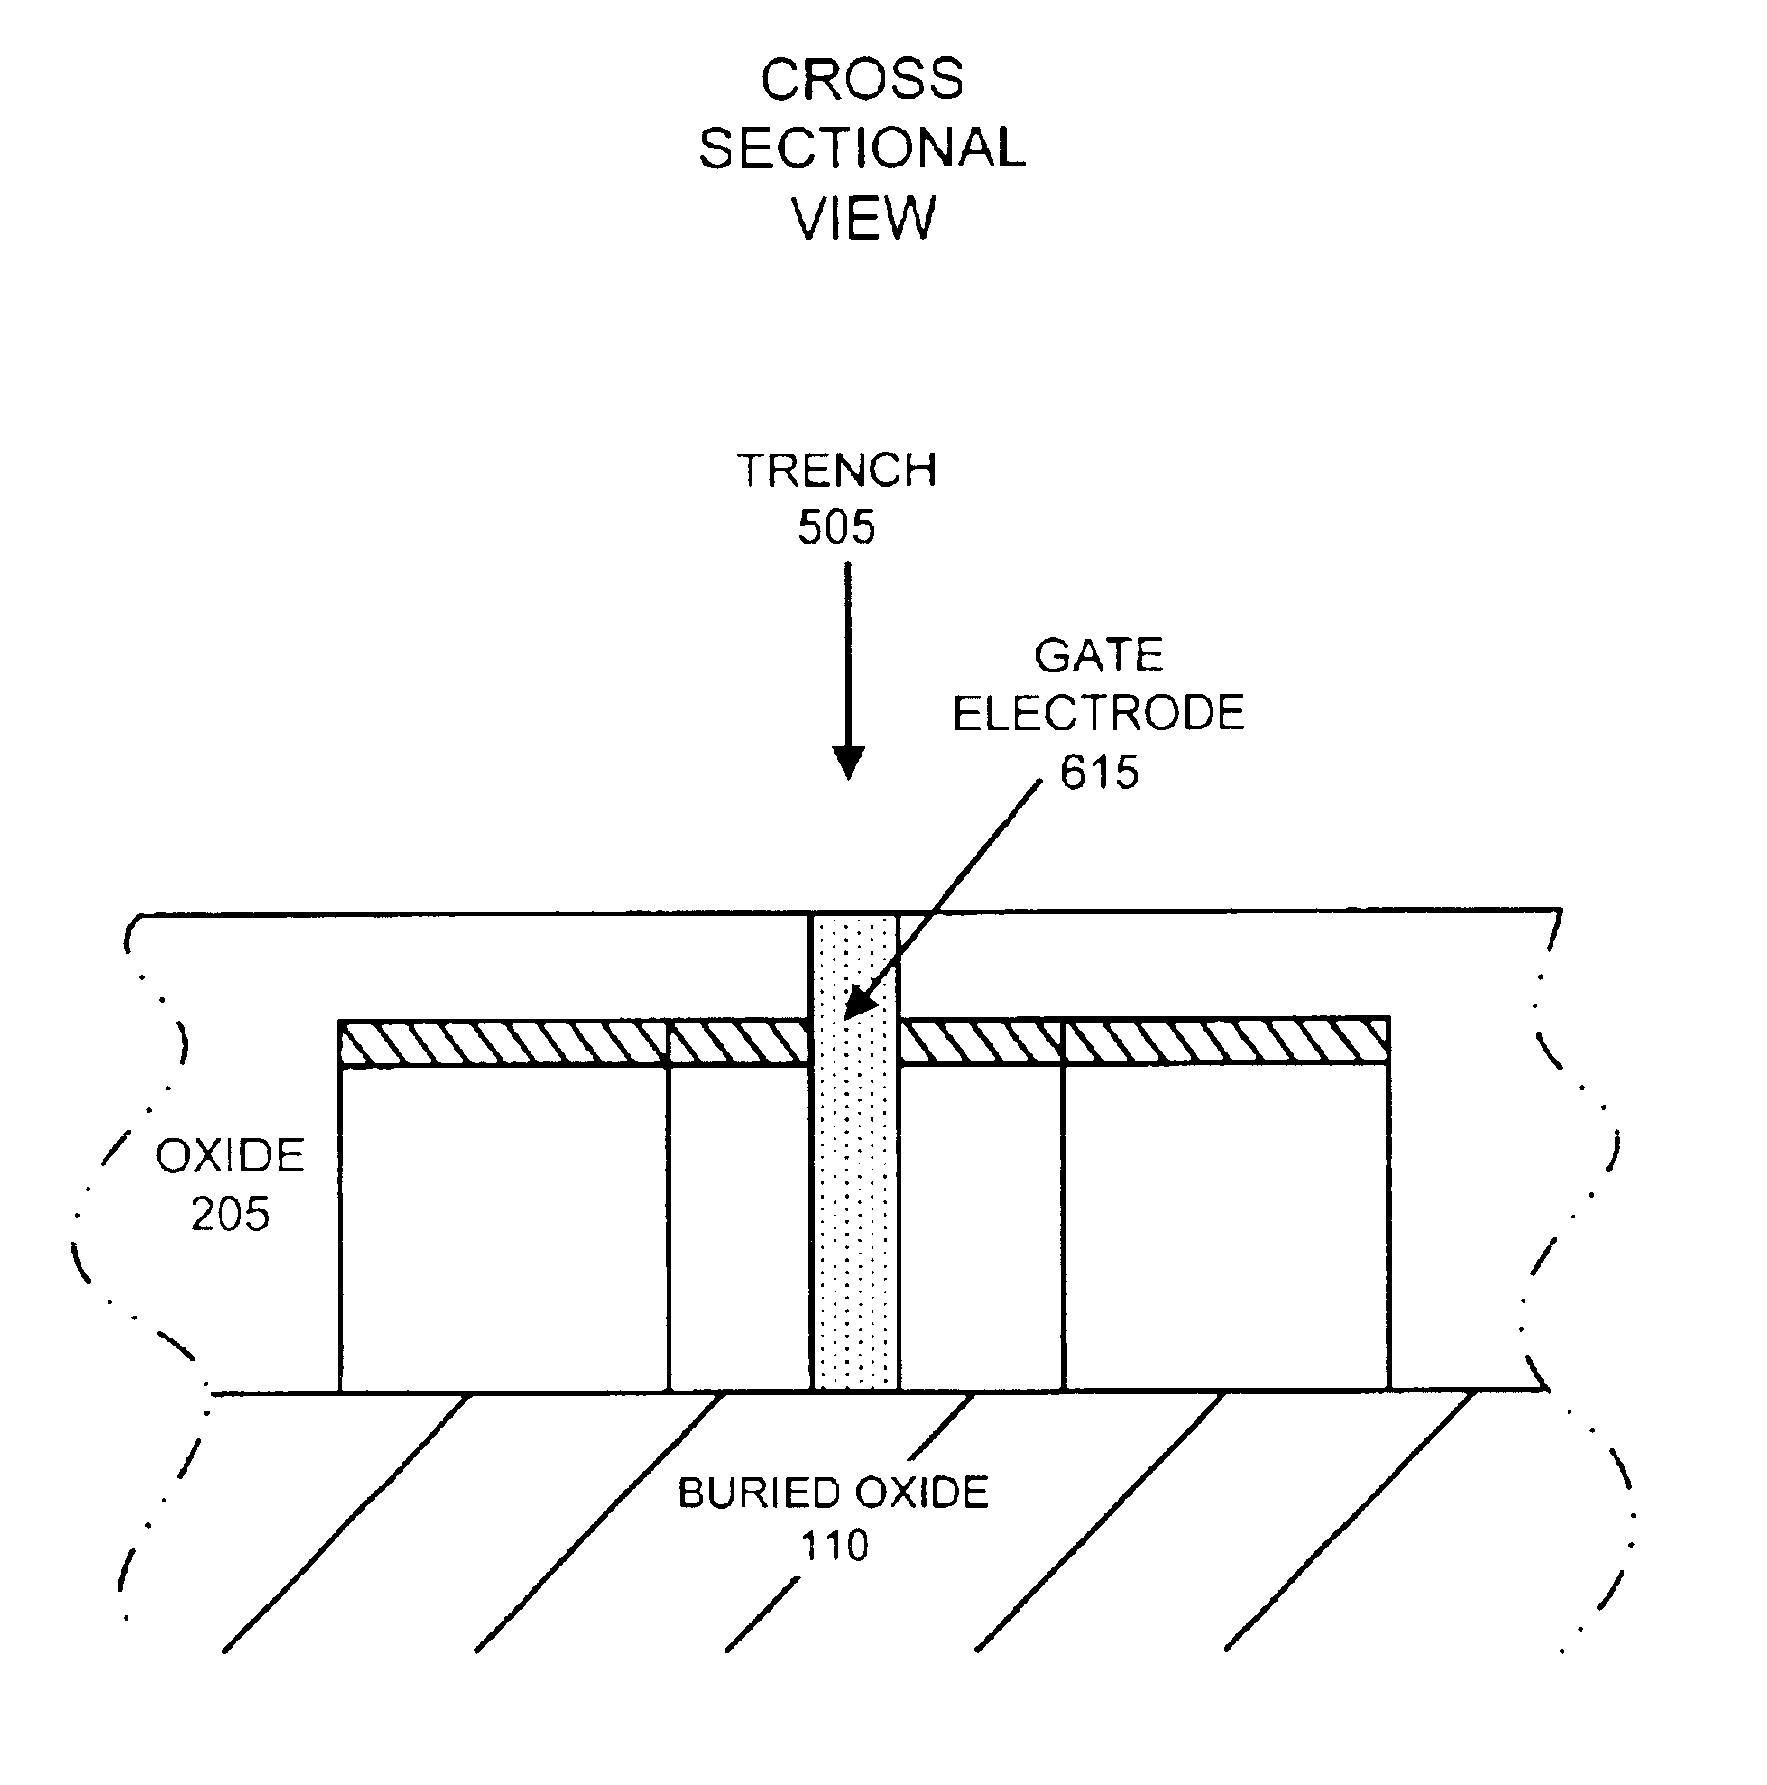 Finfet gate formation using reverse trim of dummy gate